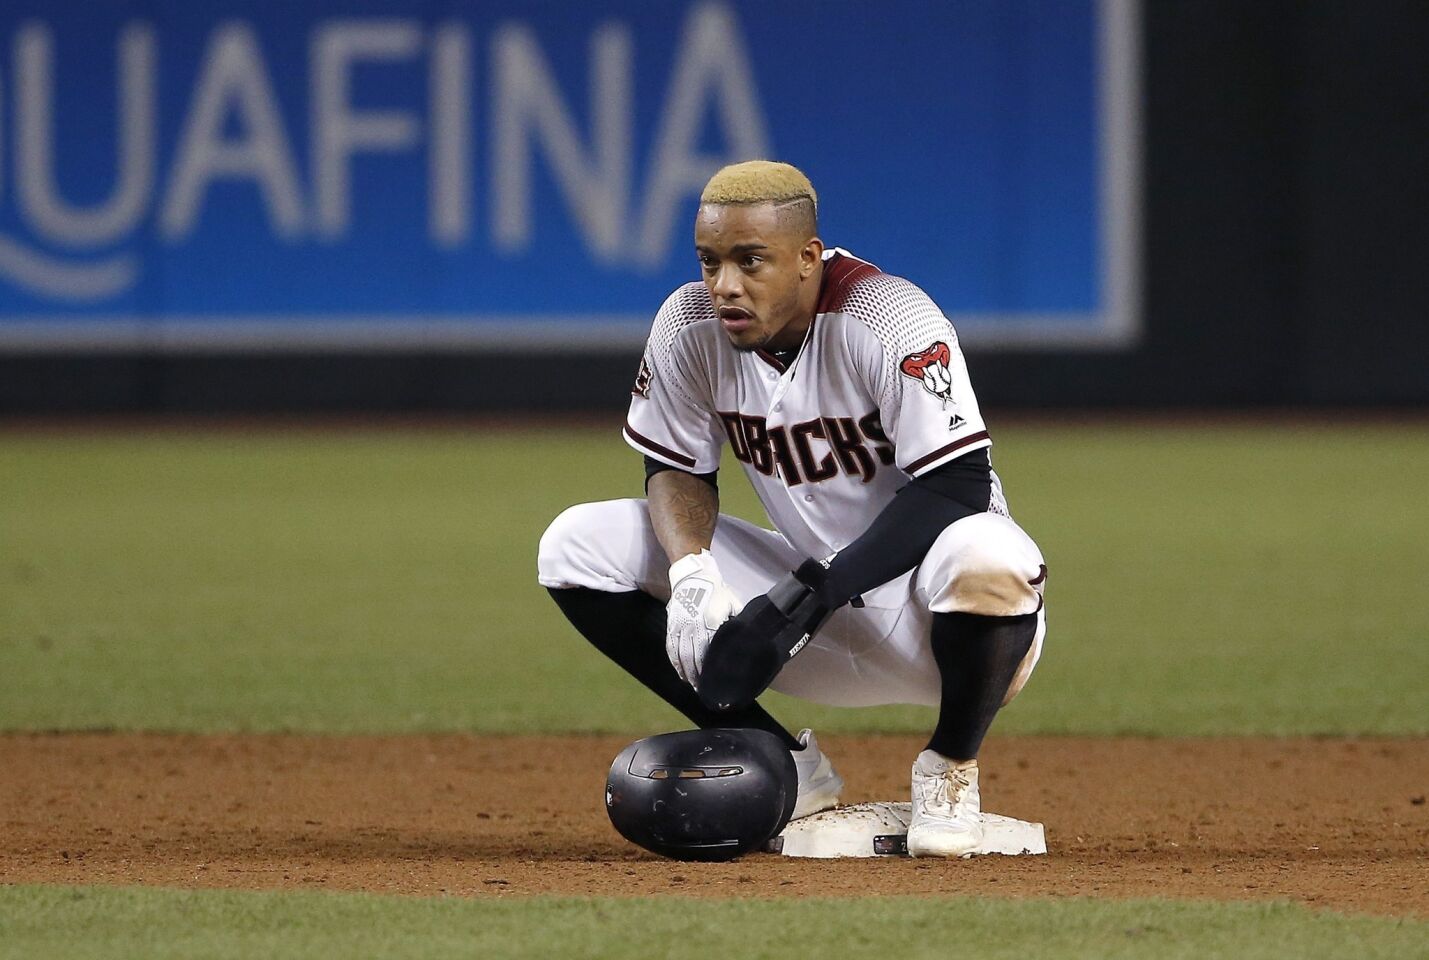 Arizona Diamondbacks' Ketel Marte pauses at second base during the second inning of a baseball game against the Los Angeles Dodgers Wednesday, Sept. 26, 2018, in Phoenix. (AP Photo/Ross D. Franklin)